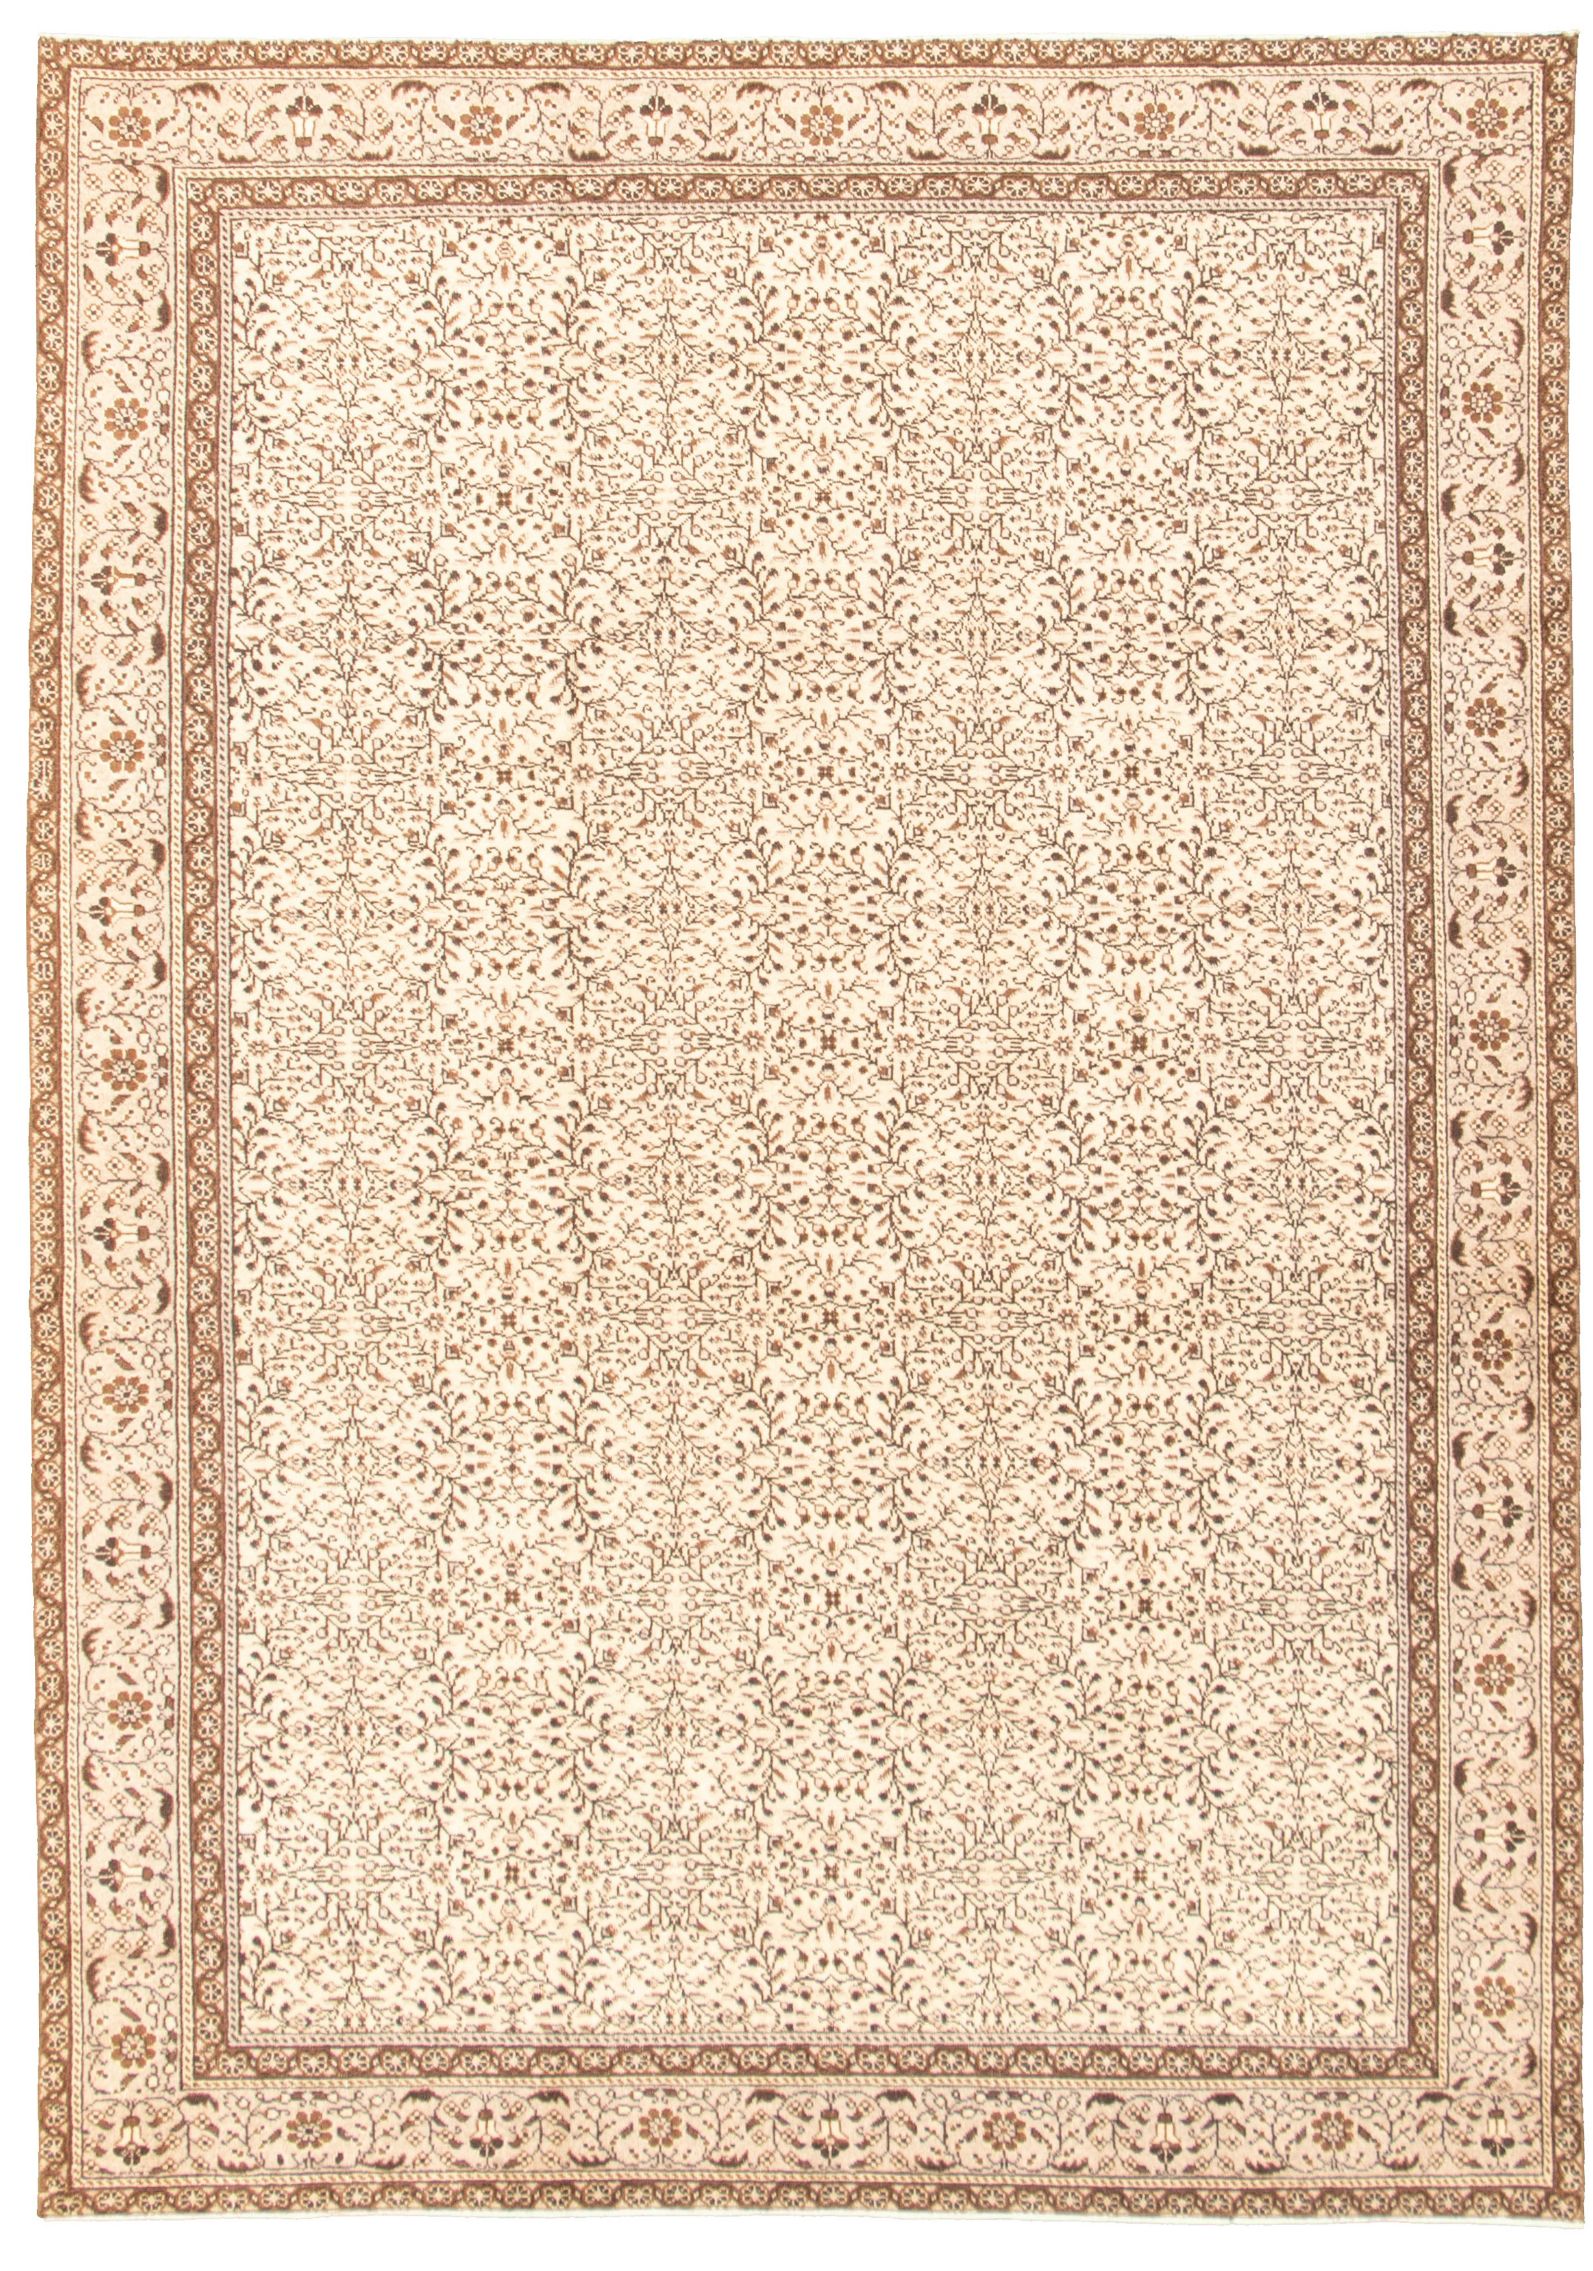 Hand-knotted Keisari Vintage Cream Wool Rug 6'6" x 9'4"  Size: 6'6" x 9'4"  